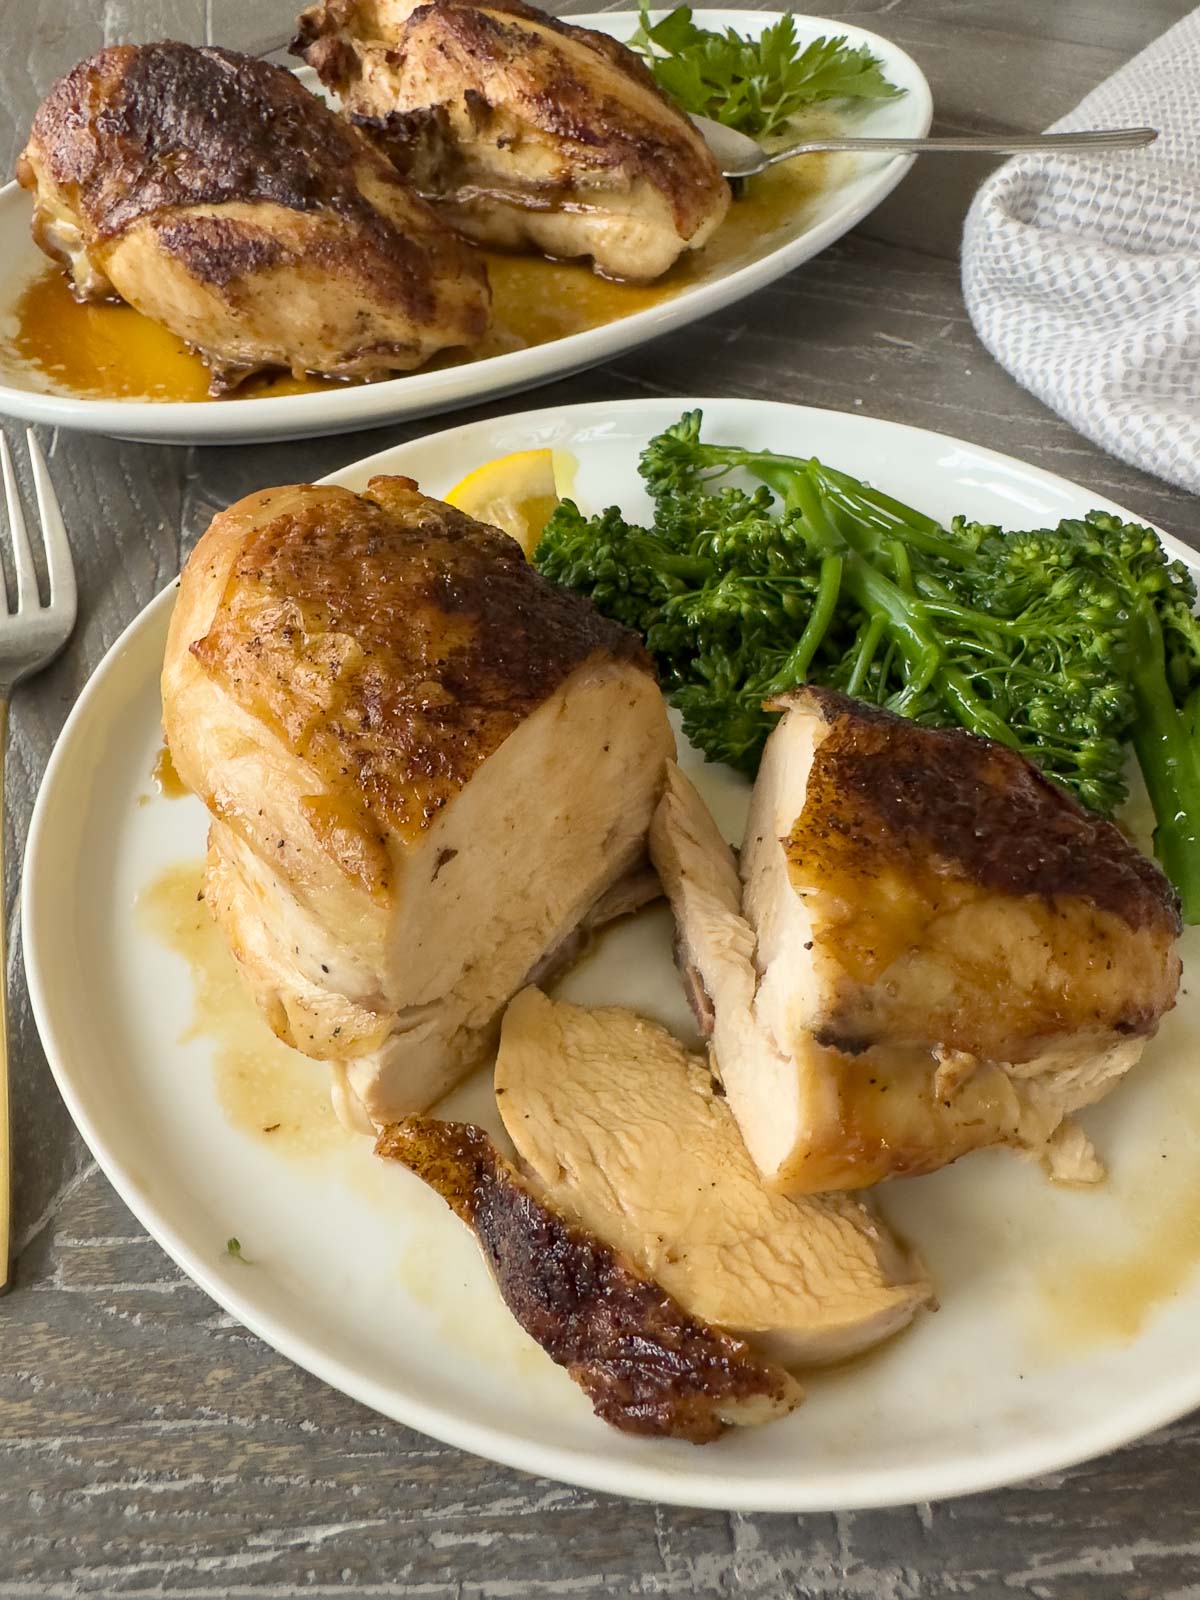 Roast chicken breast on plate, sliced to eat, with broccolini.